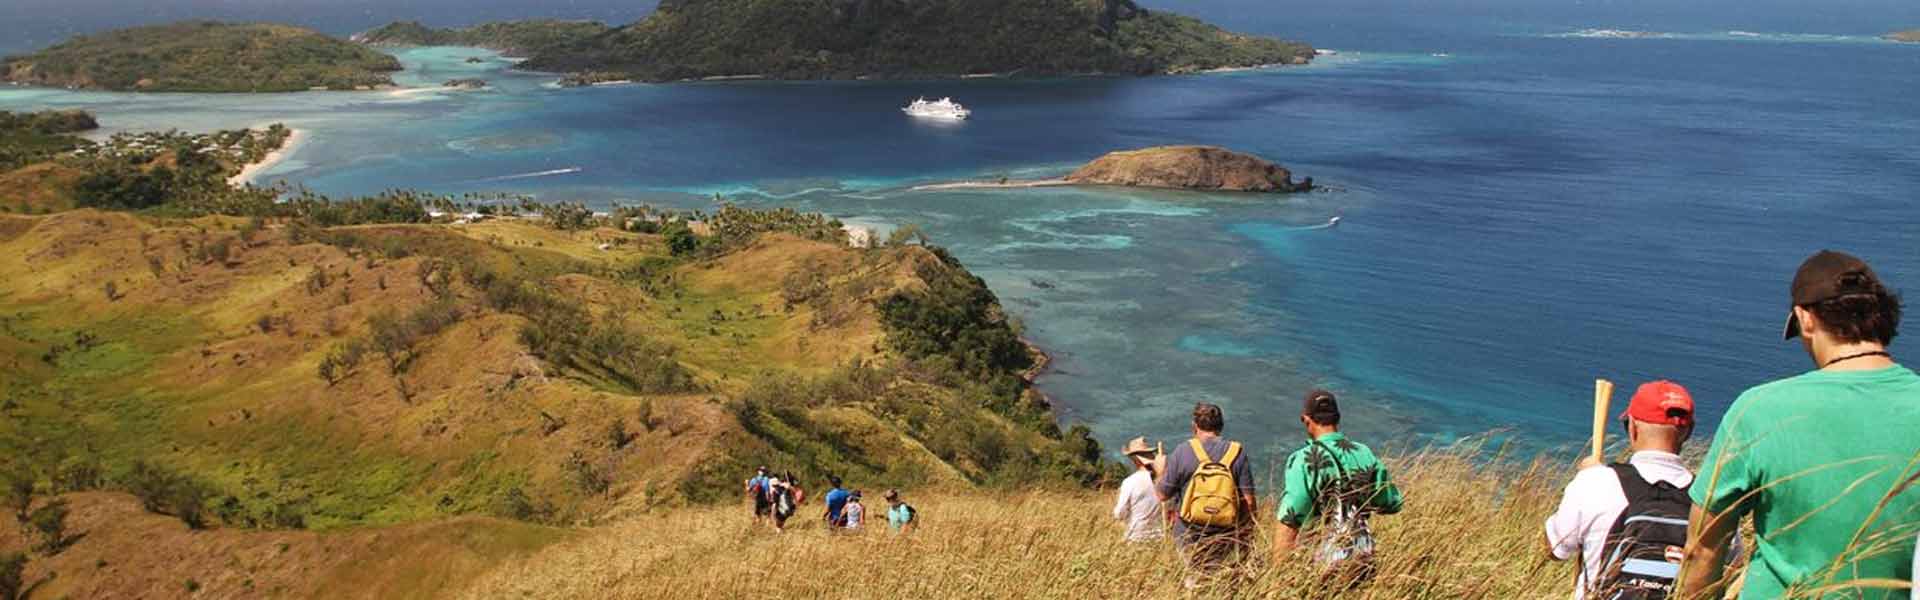 3 Nights’ Fiji Family Cruise with Flights, Pre/Post Stays, Transfers & More!!